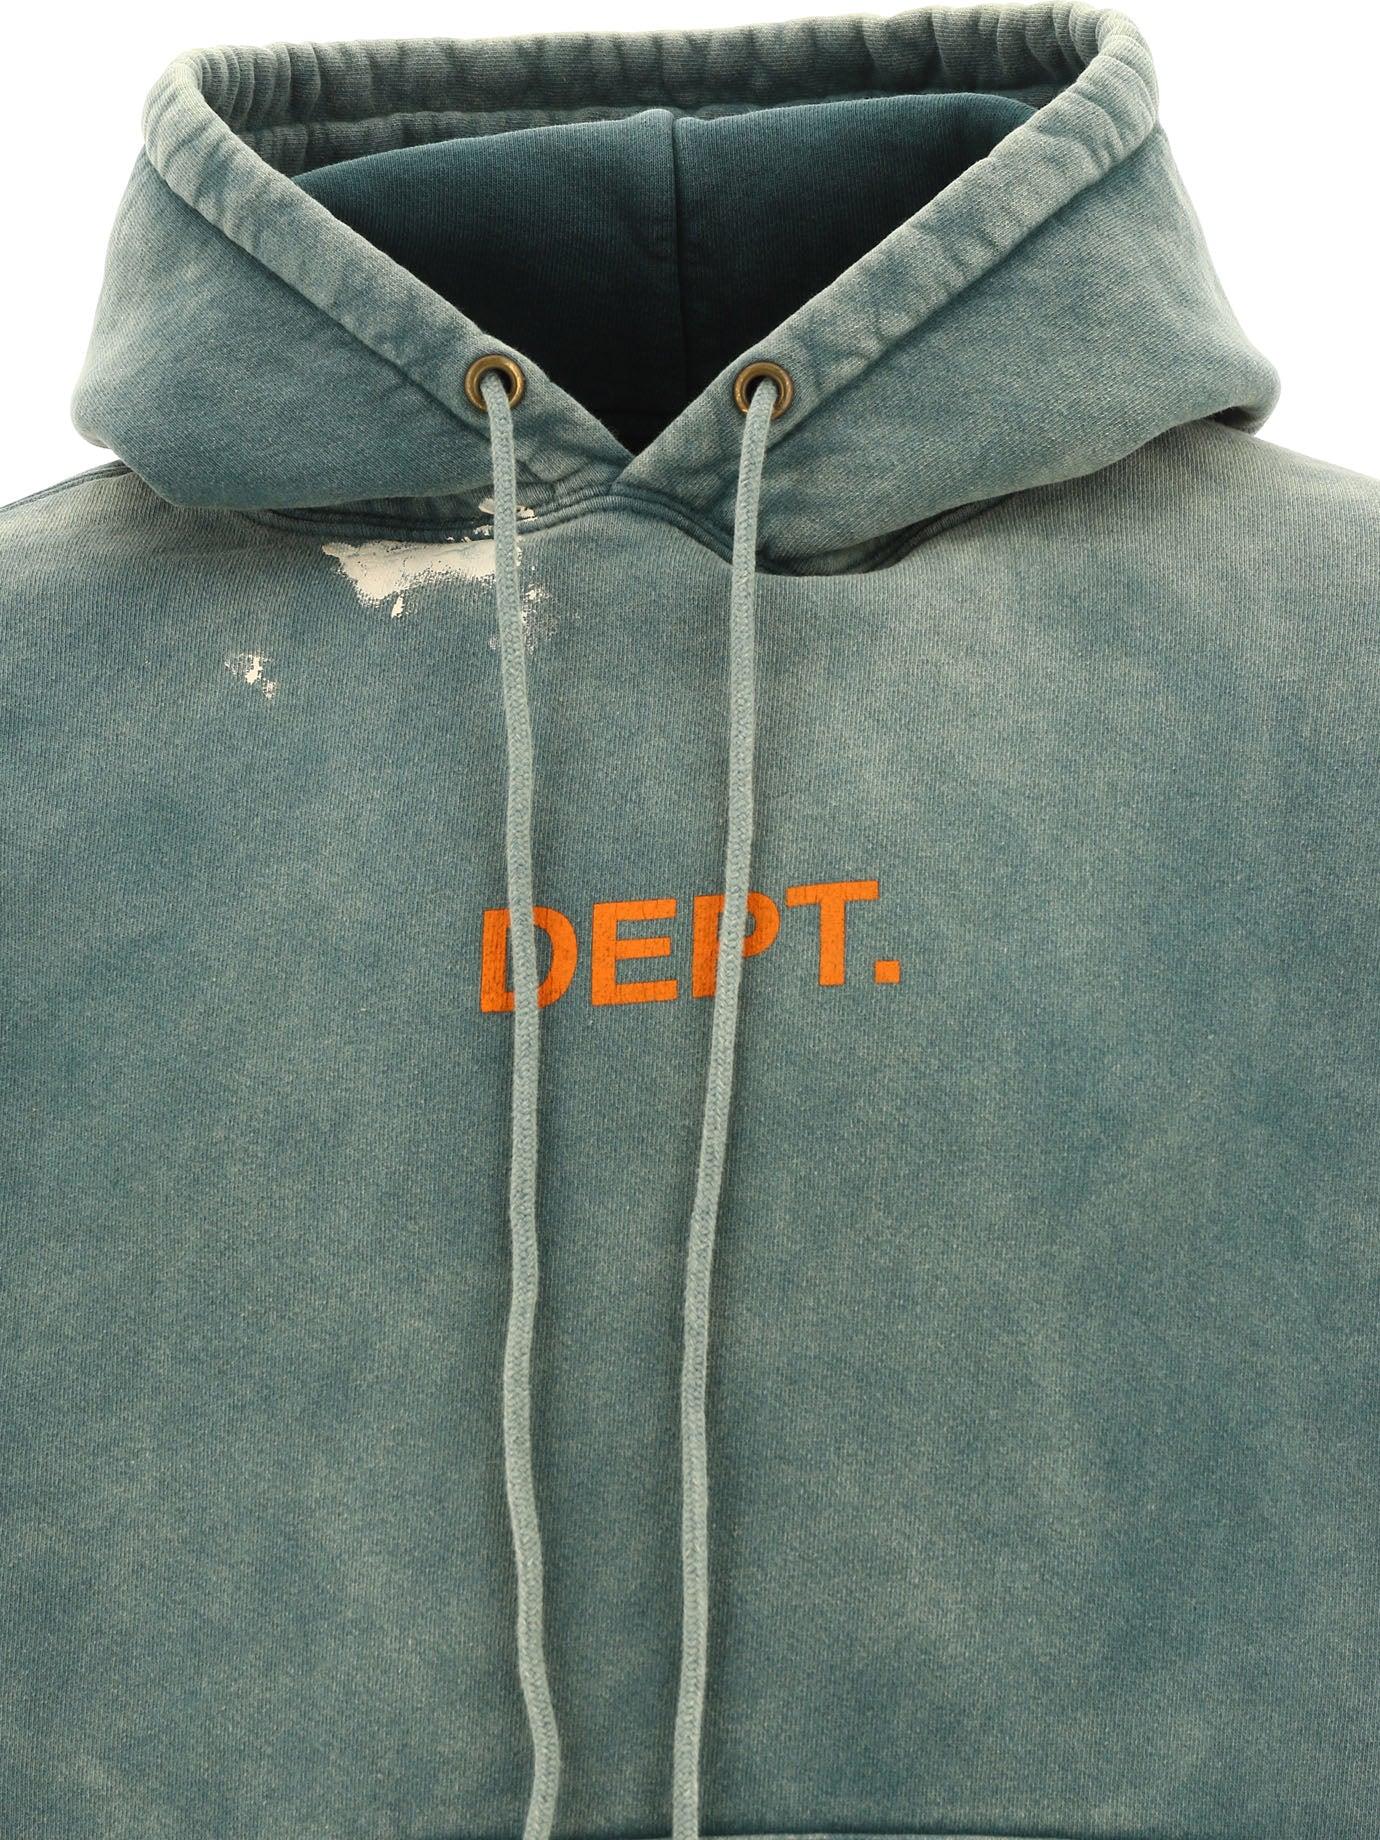 The Gallery Dept Hoodie: A Streetwear Icon and Its Influence on Fashion Culture插图